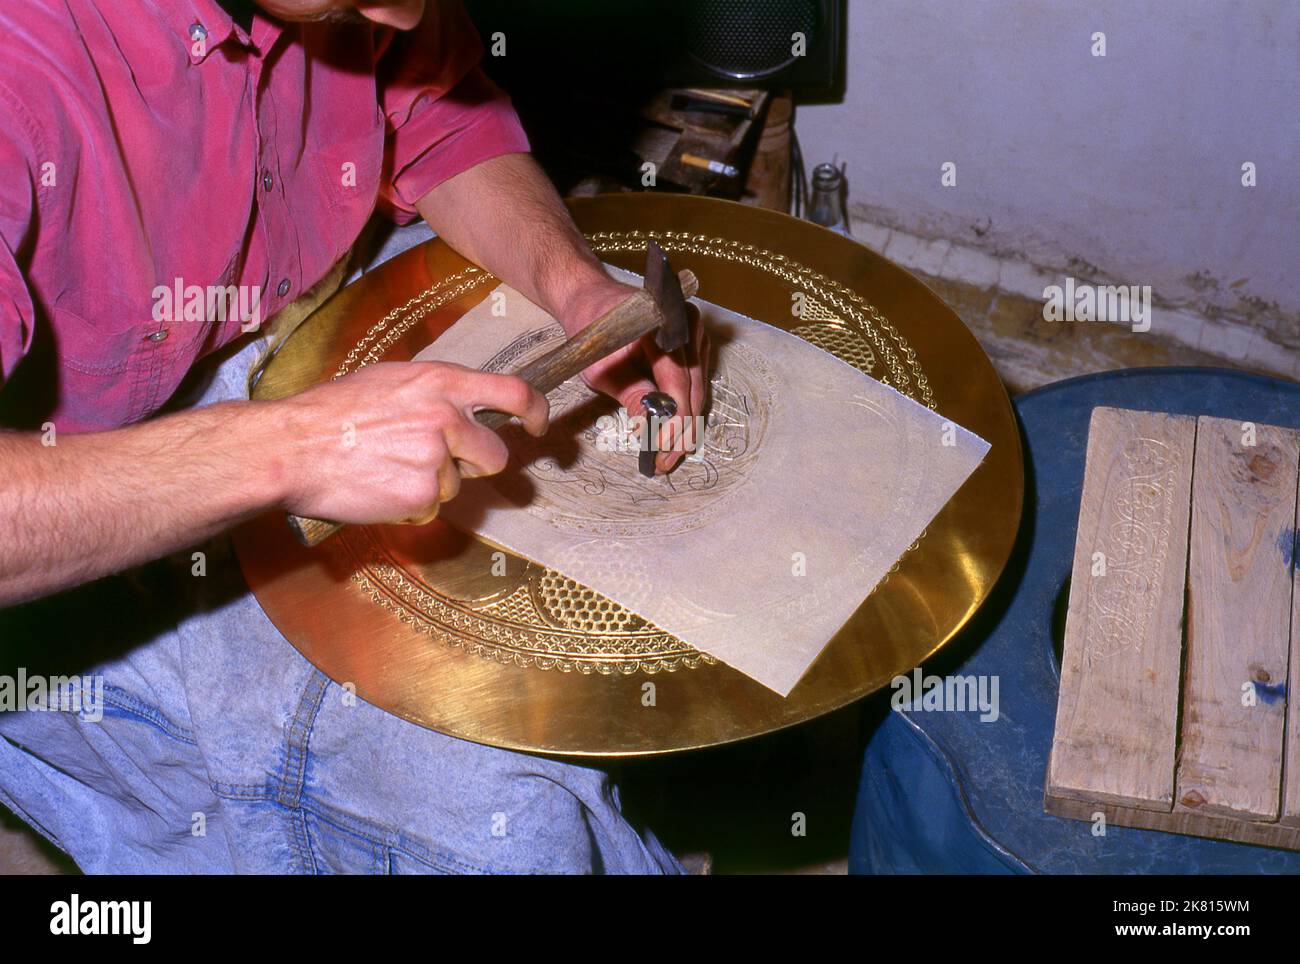 Syria: Brassware artisan in the ancient Great Bazaar, Aleppo (1997). Aleppo's Great Bazaar (in Arabic, suq or souq) was rebuilt first by the Egyptian Mamelukes who drove out the Mongols, and then, after 1516, by the Turks who incorporated Aleppo into the Ottoman Empire. During the Syrian Civil War, which started in 2011, Aleppo's historic suqs suffered serious damage.  Aleppo, the second city of Syria is possibly the longest continually inhabited settlement in the world. Its Arabic name, Halab, is mentioned in Semitic texts of the third millennium BCE. Stock Photo